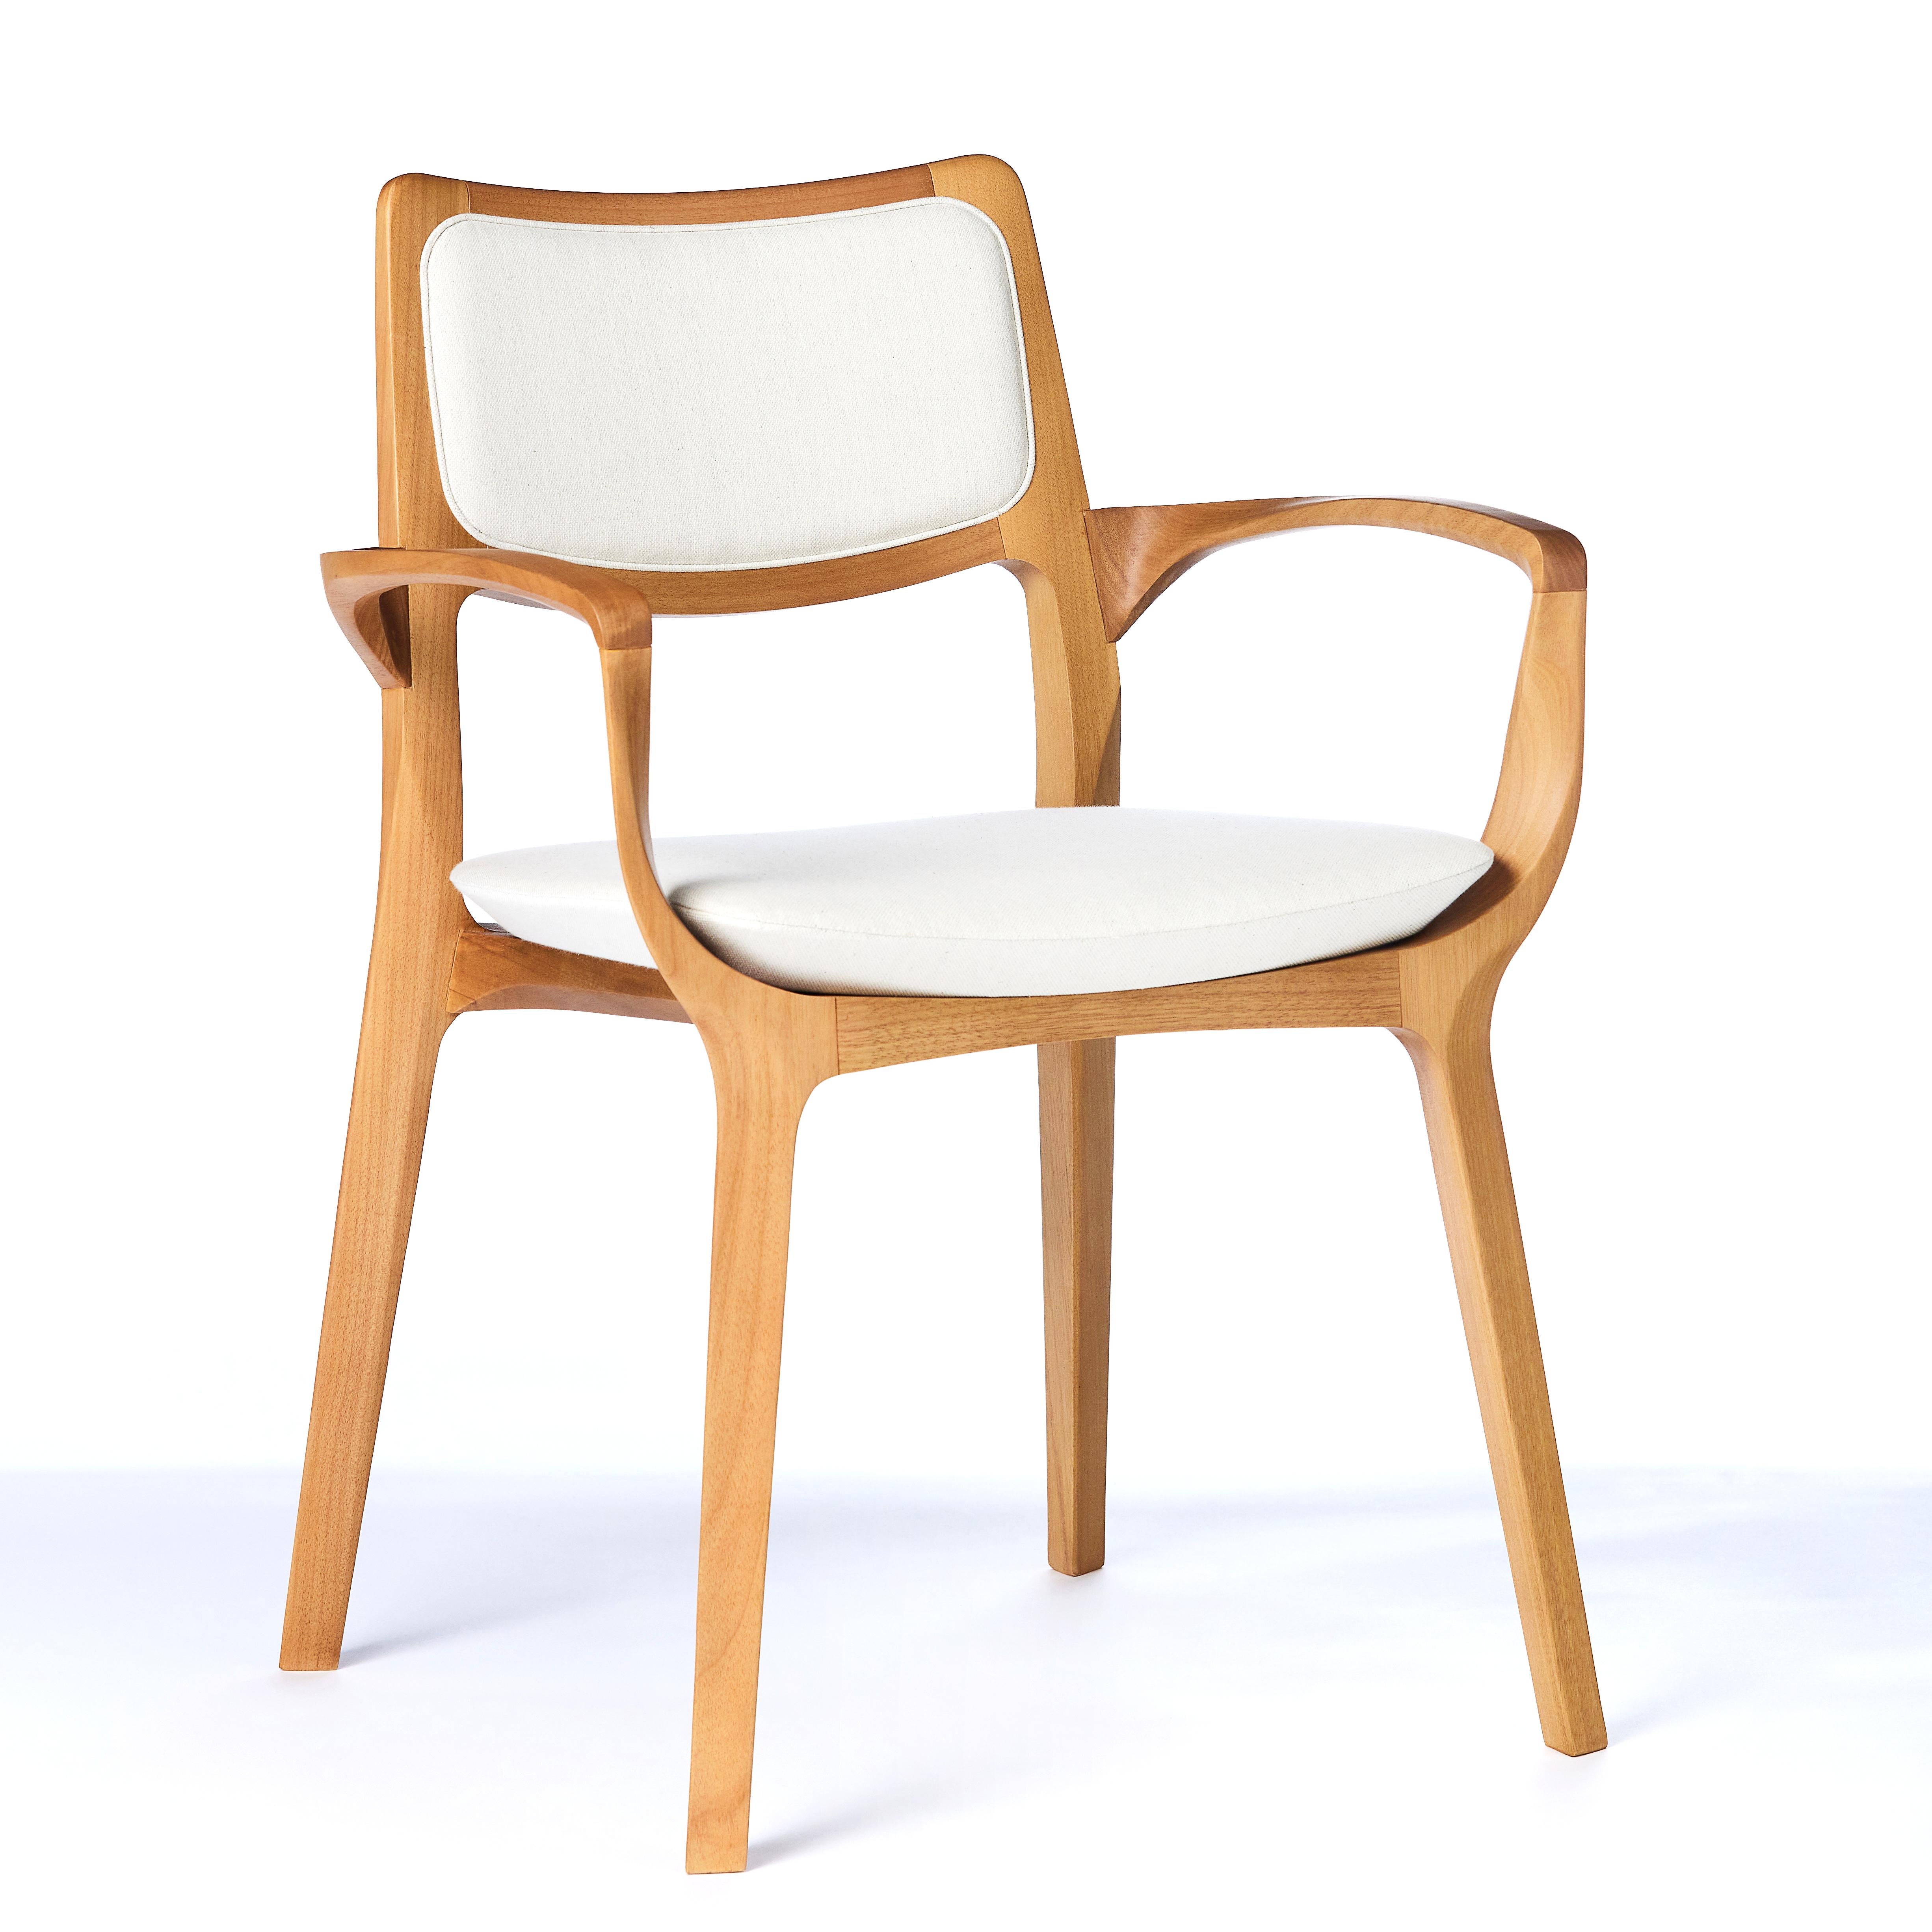 Modern Style Aurora Chair Sculpted in Walnut Finish Arms, leather back & seating For Sale 3